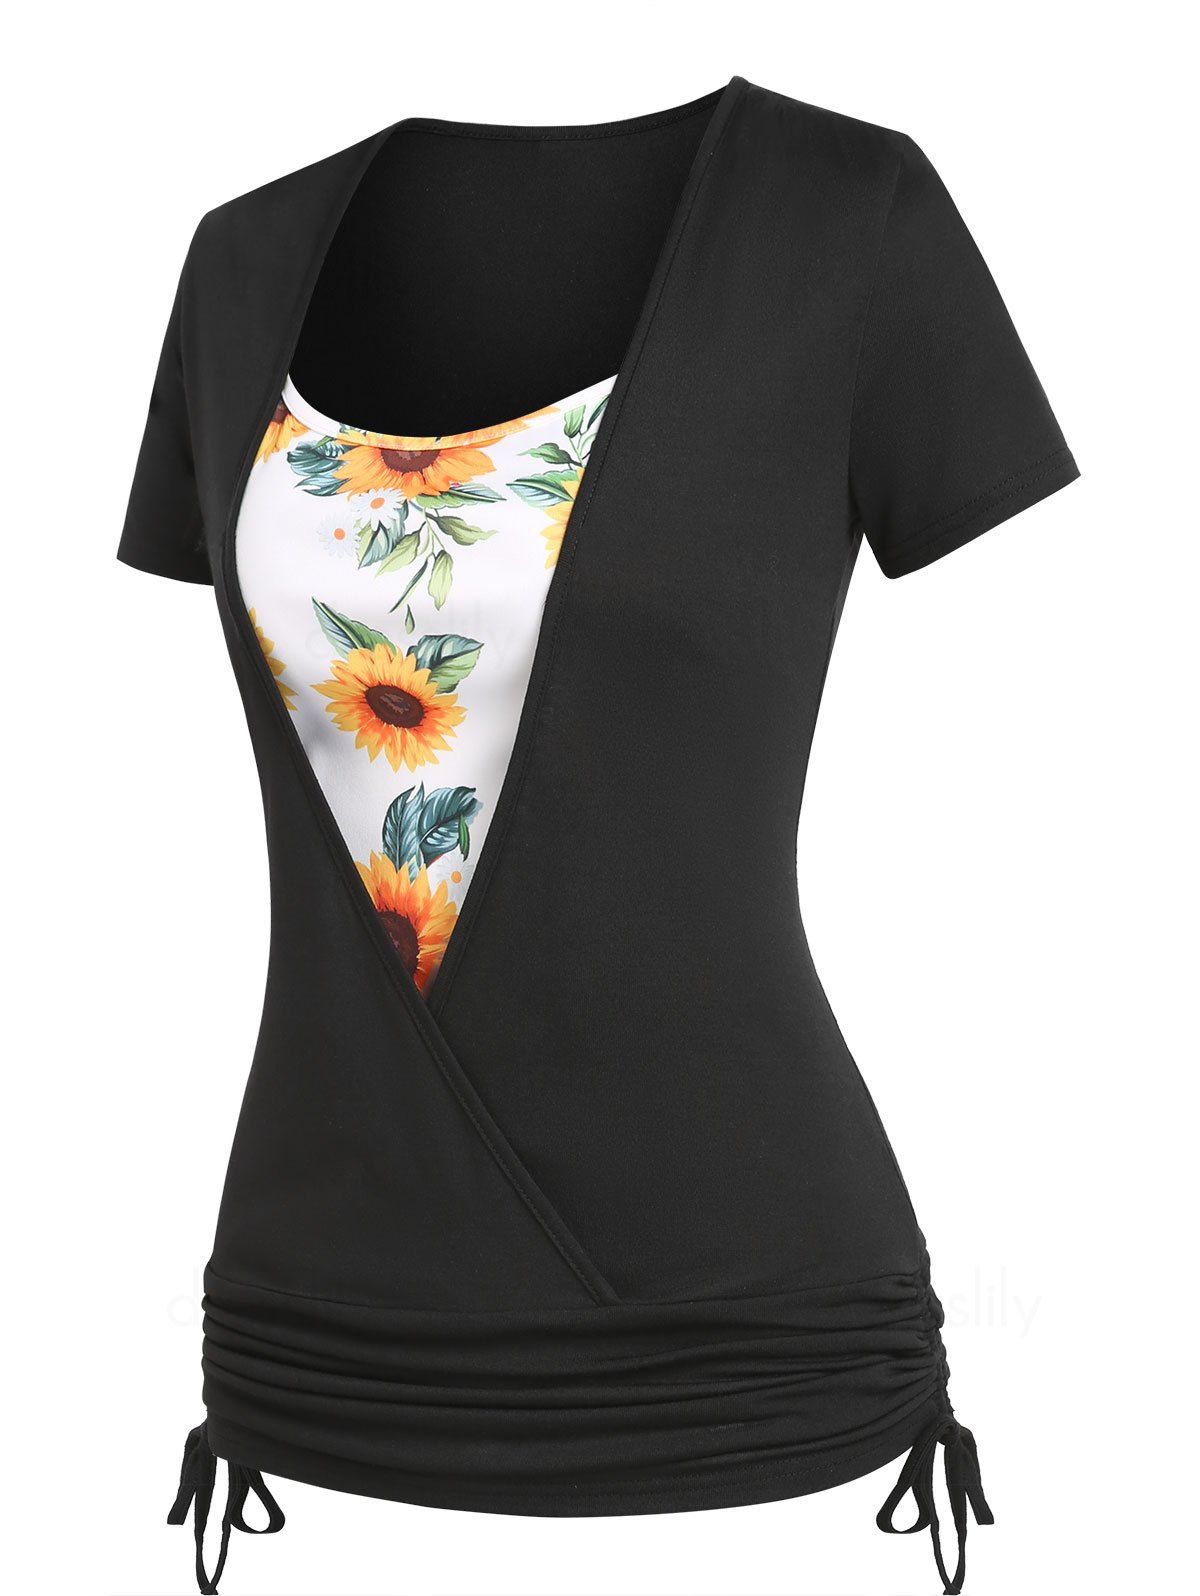 Surplice Tee Cinched Tie Ruched Sunflower Floral Print Faux Twinset T Shirt - BLACK XXXL